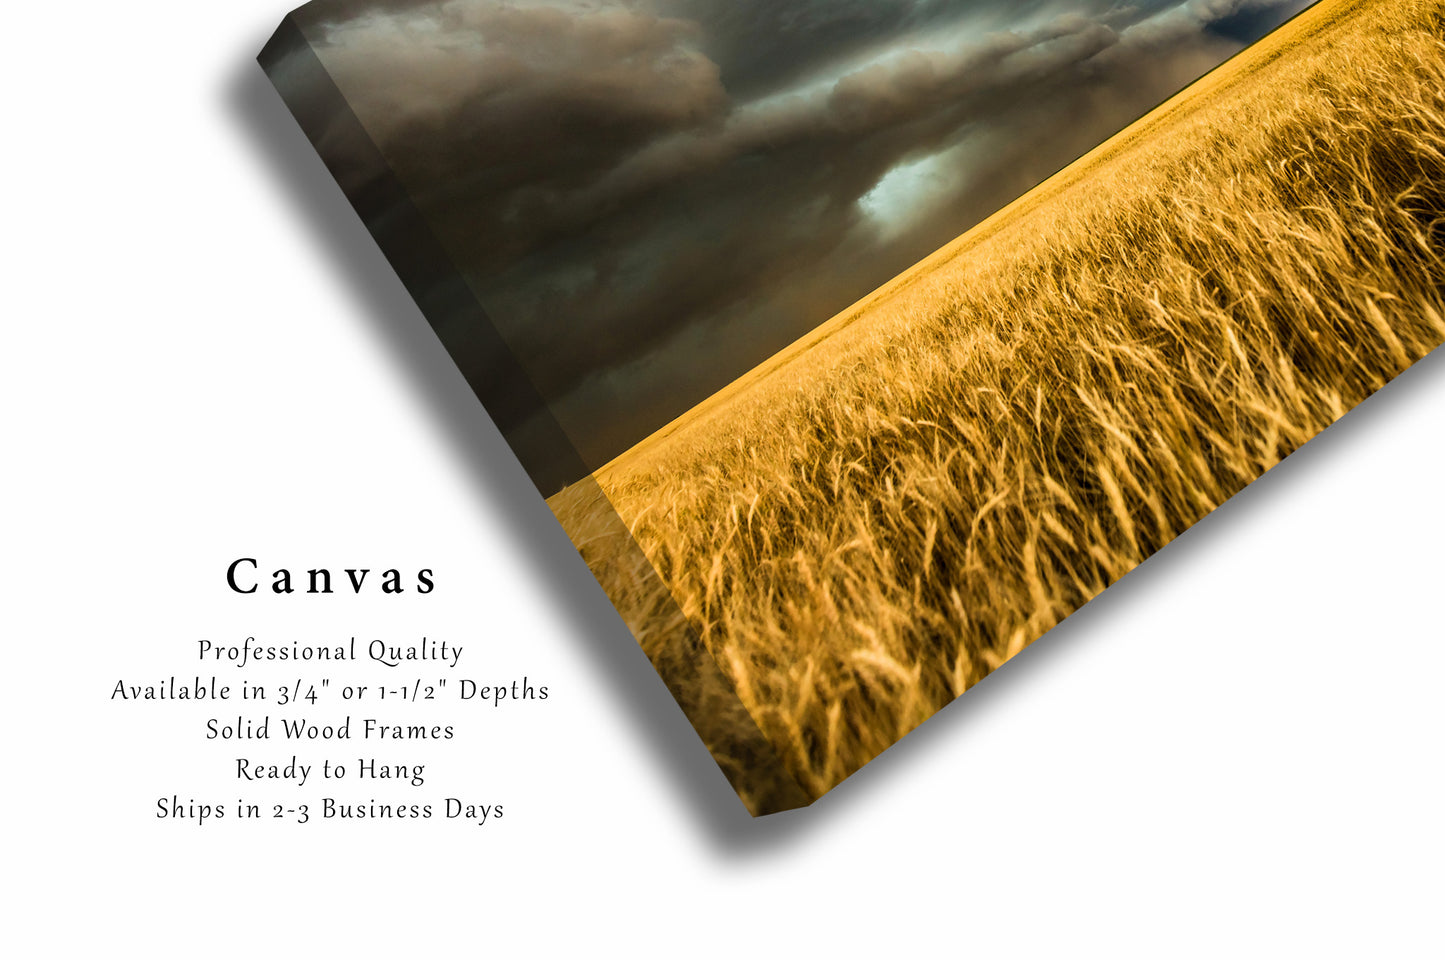 Storm Canvas Wall Art - Gallery Wrap of Thunderstorm Advancing Over Wheat Field in Colorado - Weather Photography Plains Artwork Decor